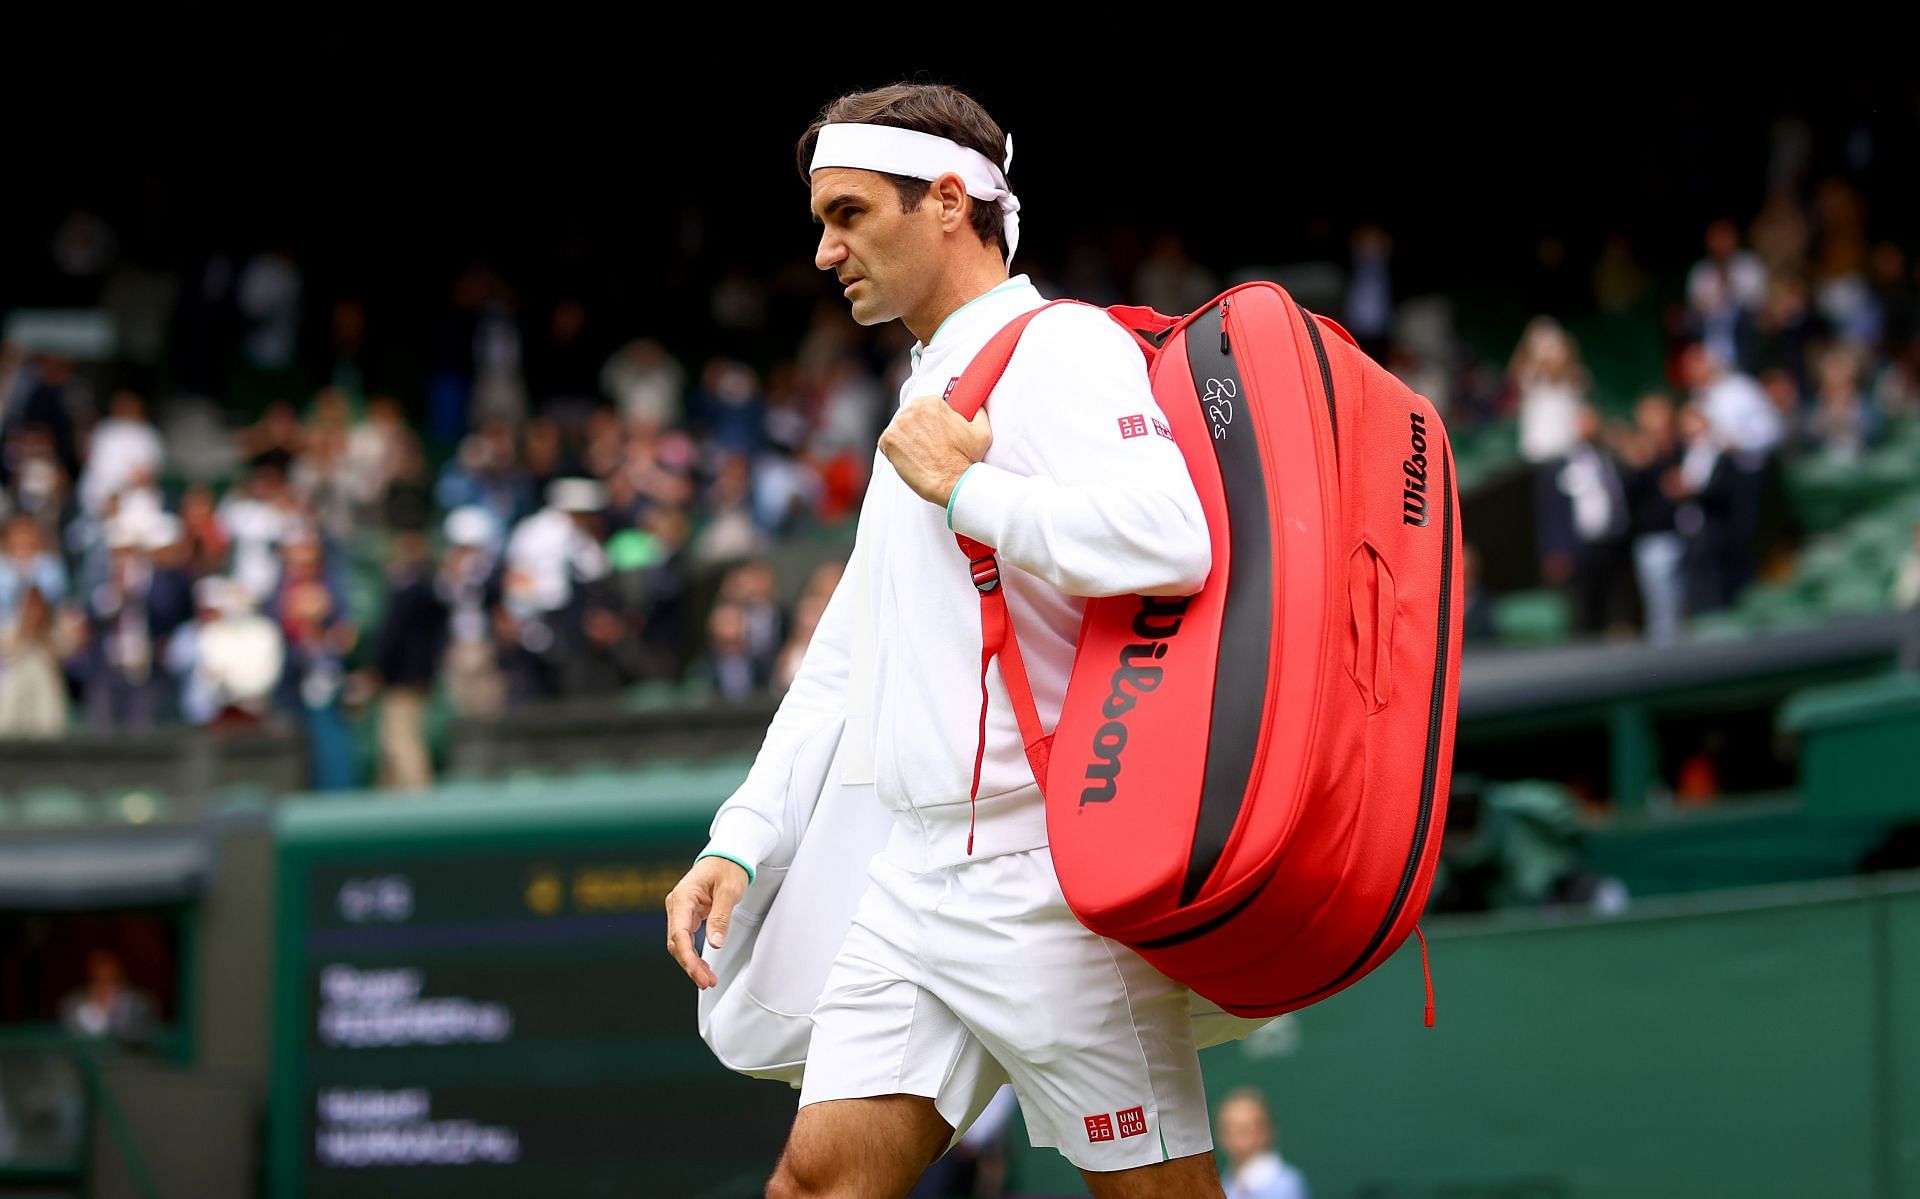 Earlier this year, Roger Federer fell out of the top 20 for the first time in two decades